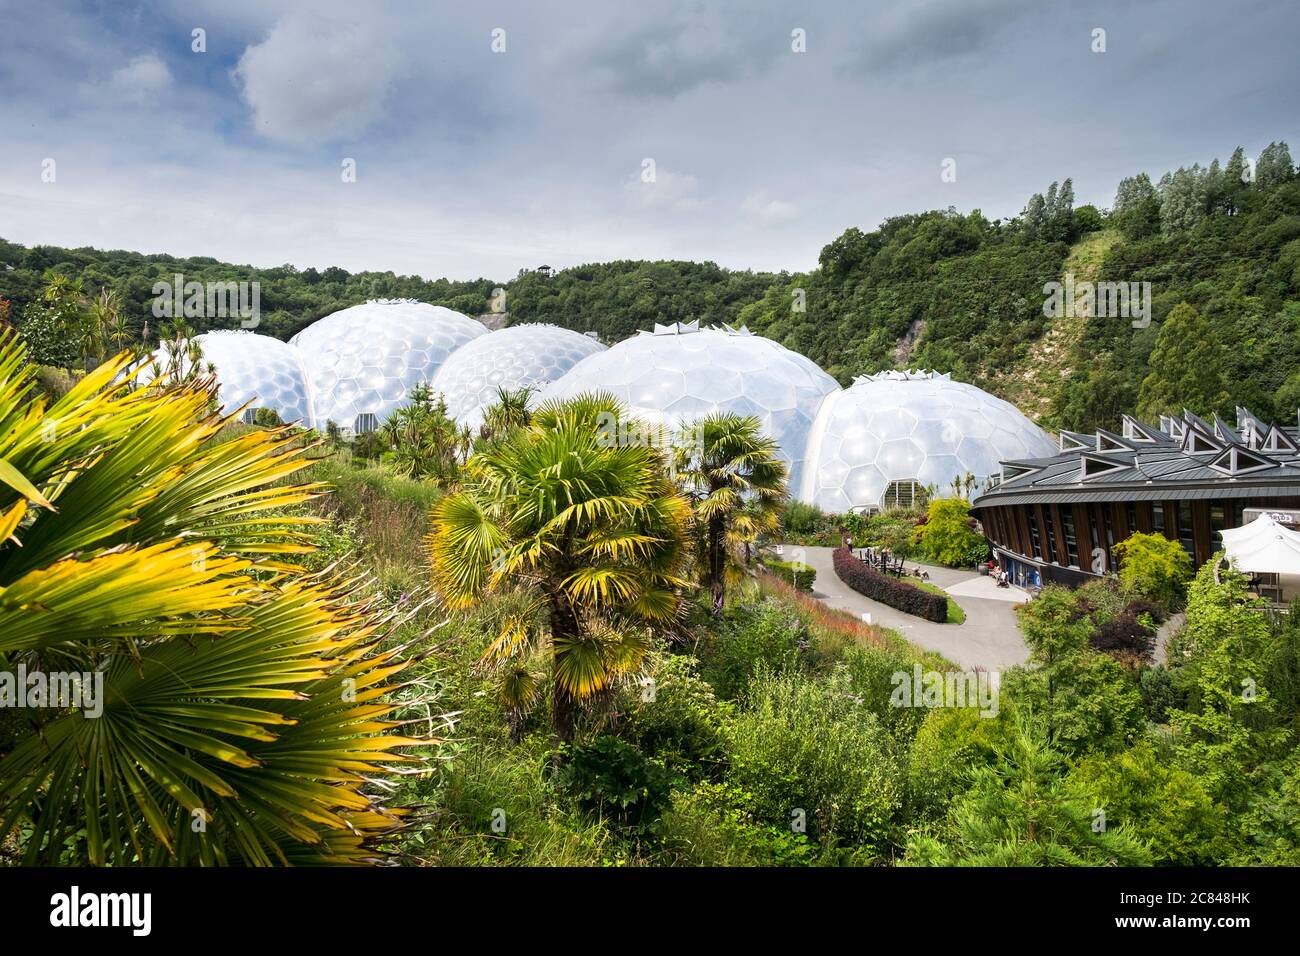 The geodesic biome domes at the Eden Project in Cornwall a popular visitor attraction. Stock Photo